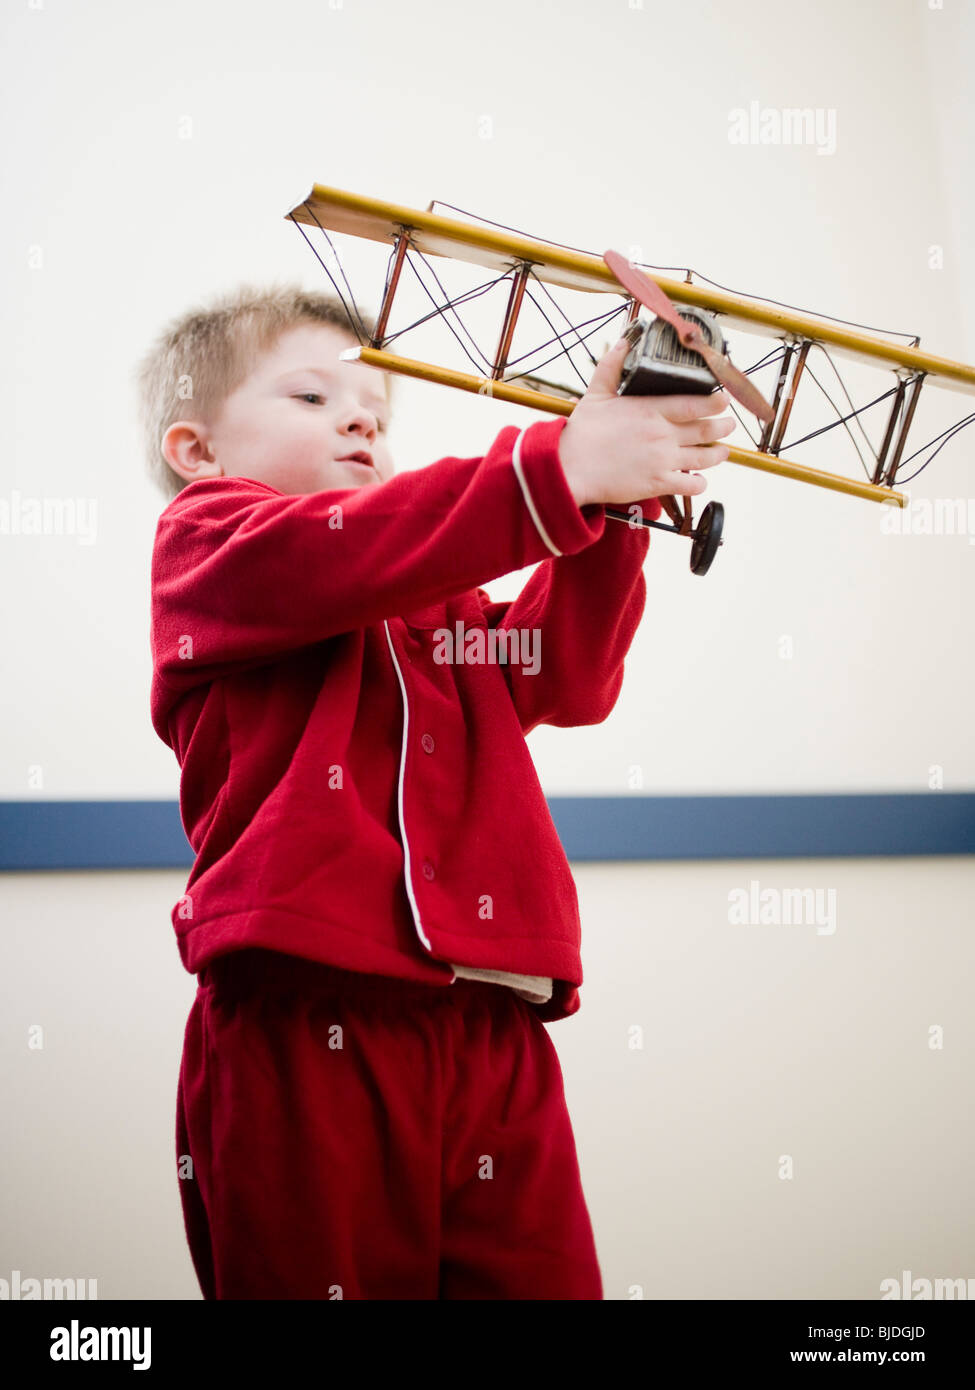 boy playing with a toy plane Stock Photo